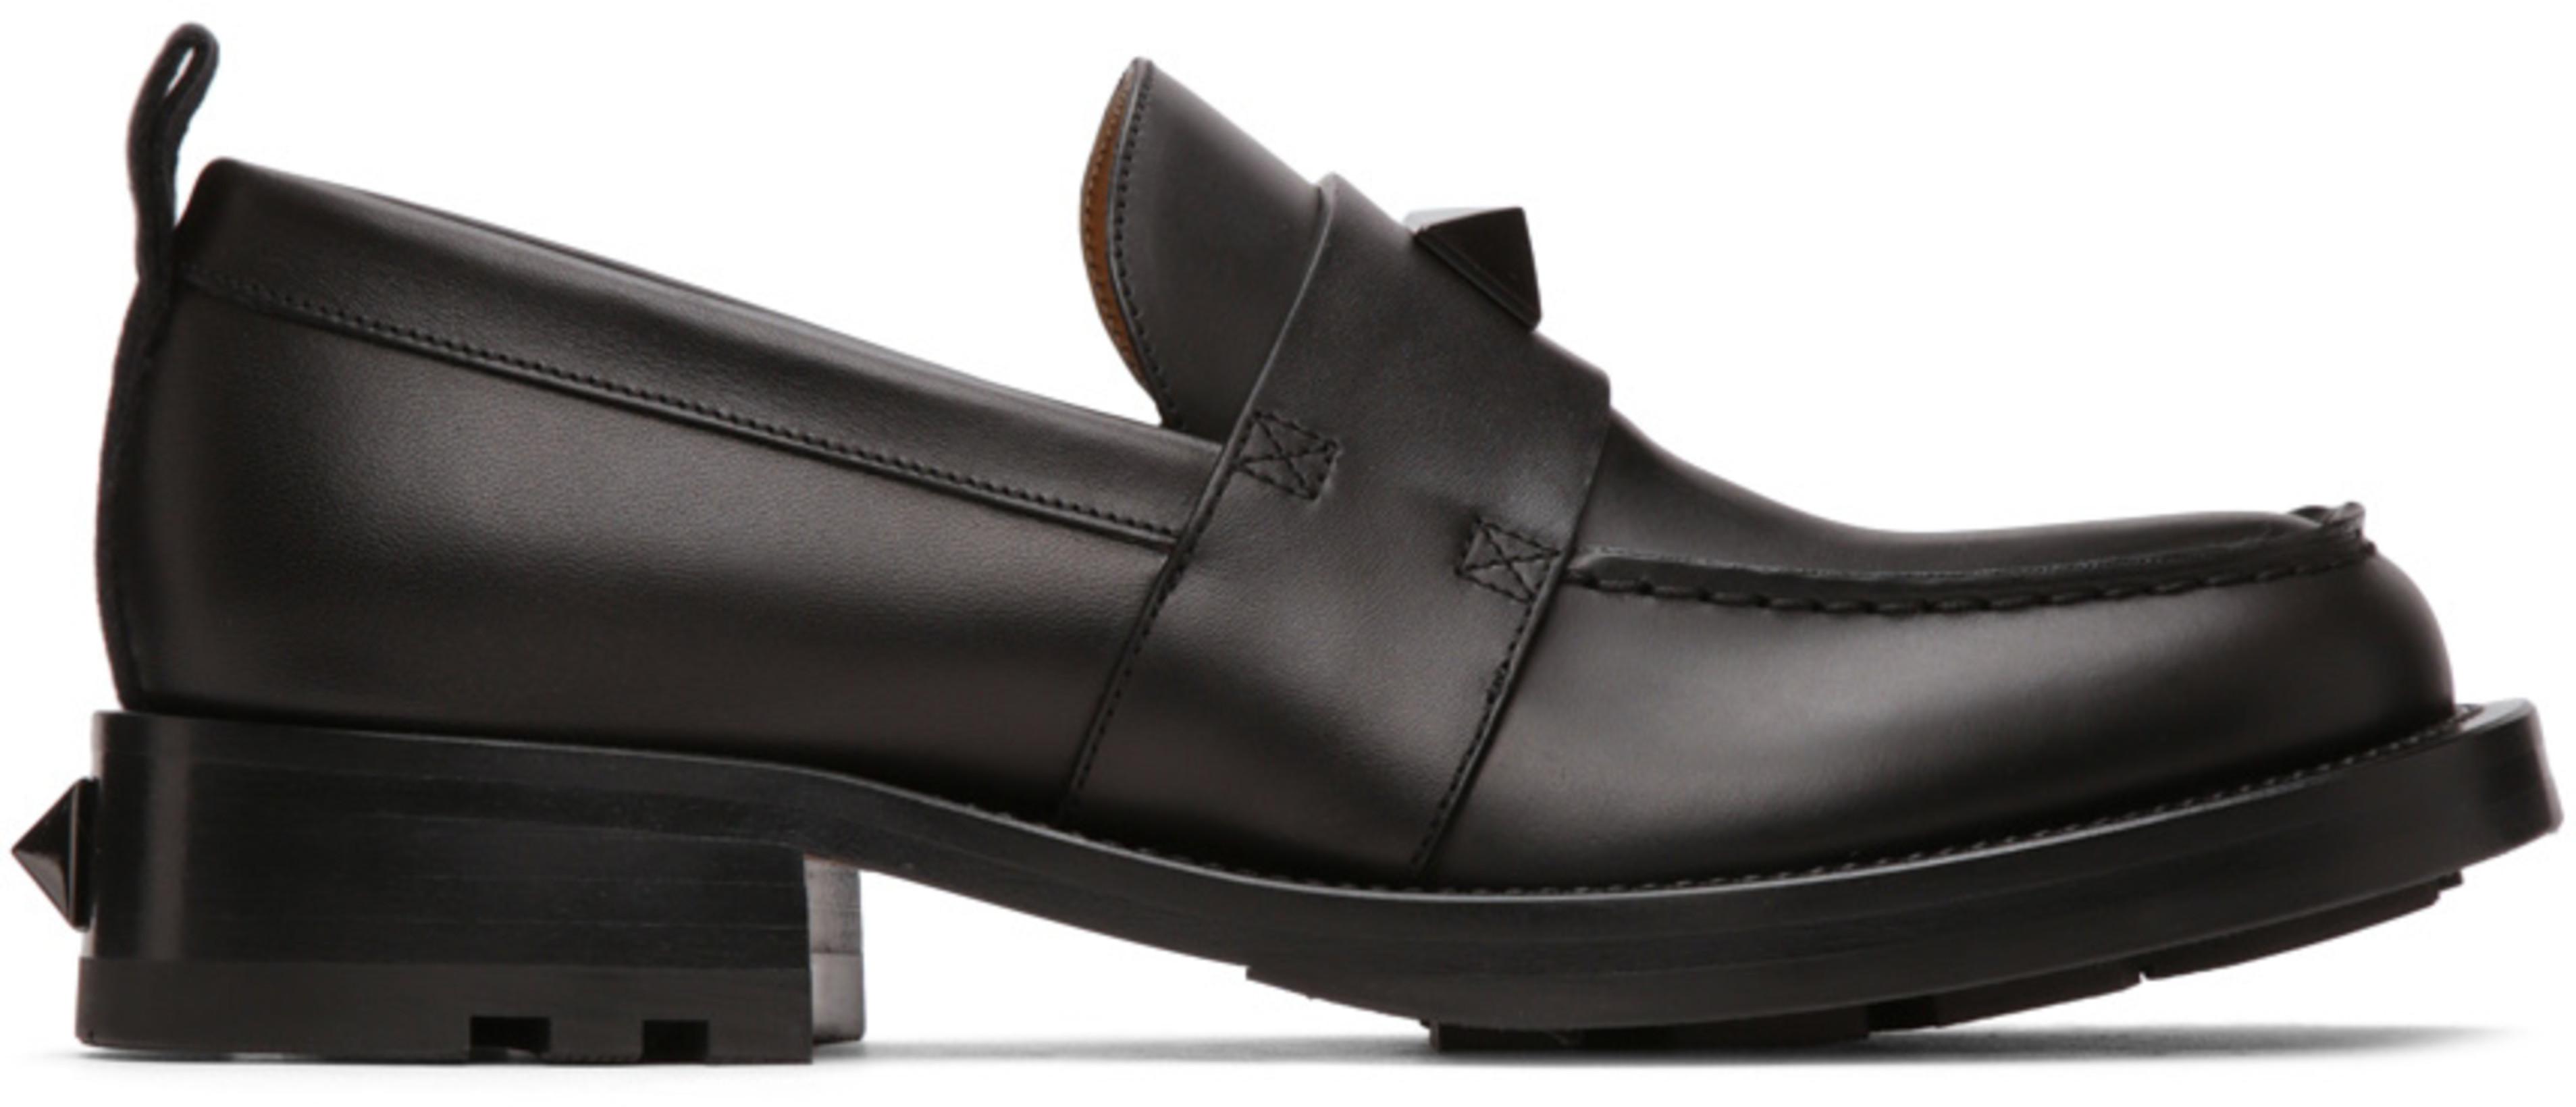 Black Roman Stud Loafers by VALENTINO